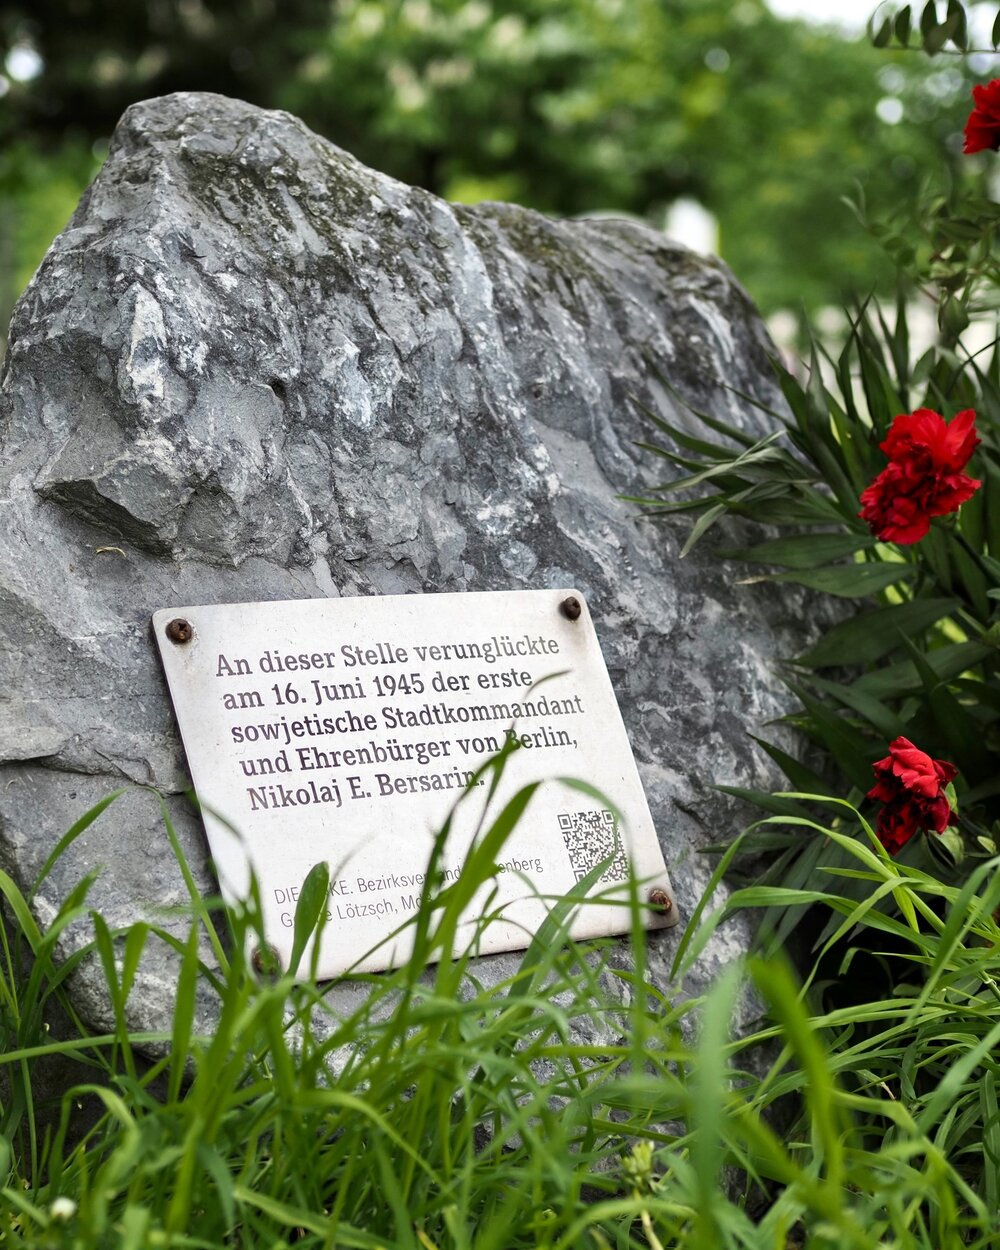 🪦 Site of Soviet Colonel-General Nikolai Berzarin's death, 1945

📅 Berzarin lead the Soviet 5th Shock Army into Berlin at the end of WWII

🏍️ He died in a motorcycle accident shortly after the end of WWII

#whitlamsberlin #history #berlin #wwii #w